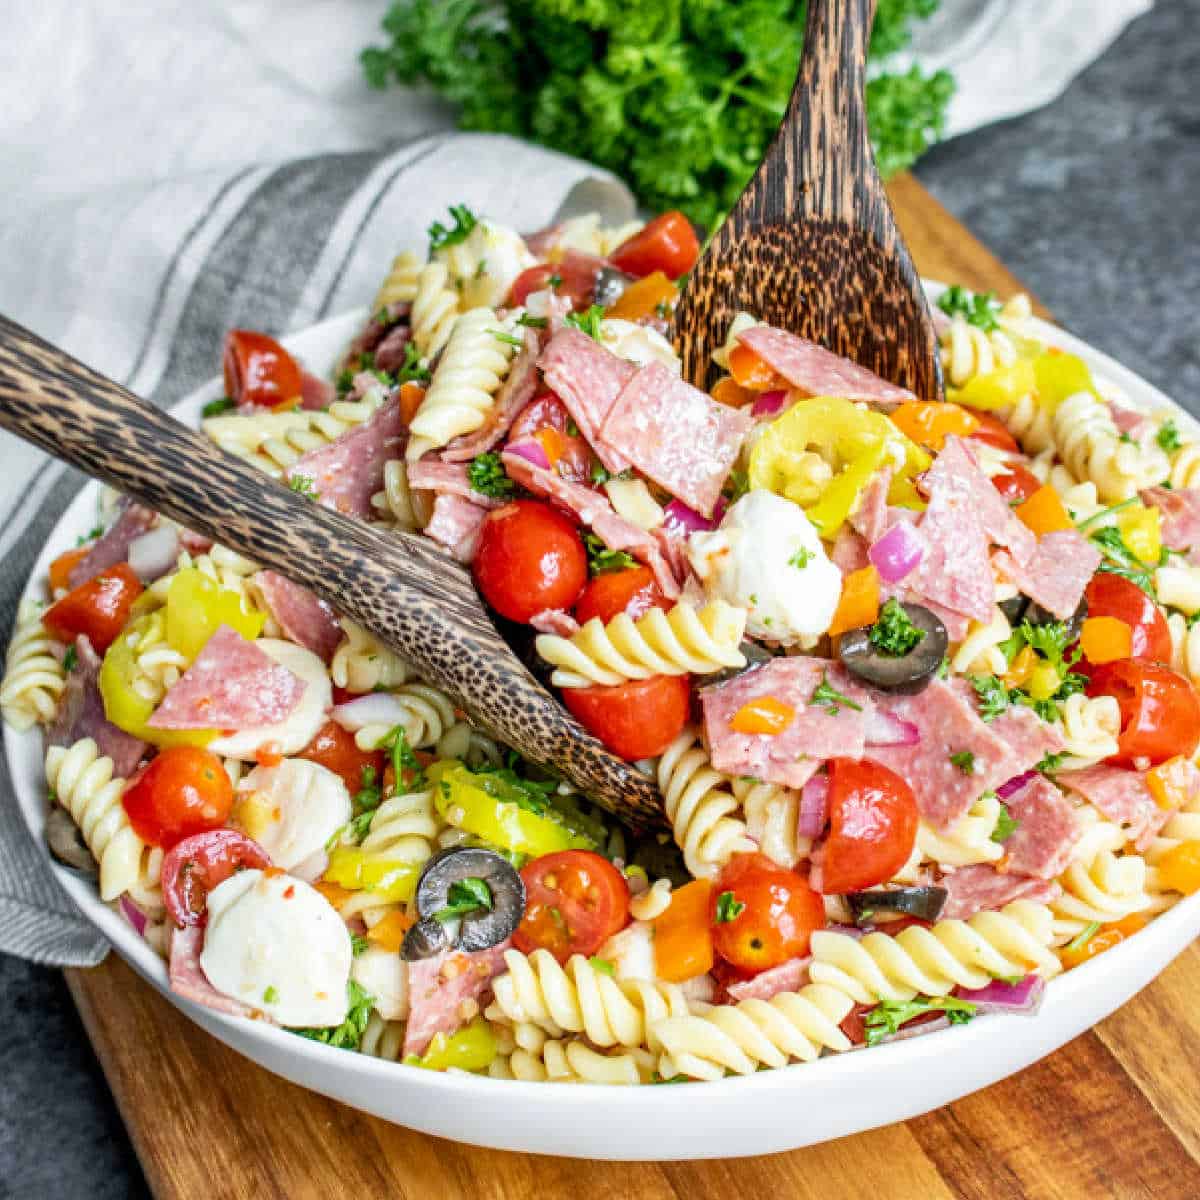 Italian Pasta Salad in a white bowl with wooden serving spoons